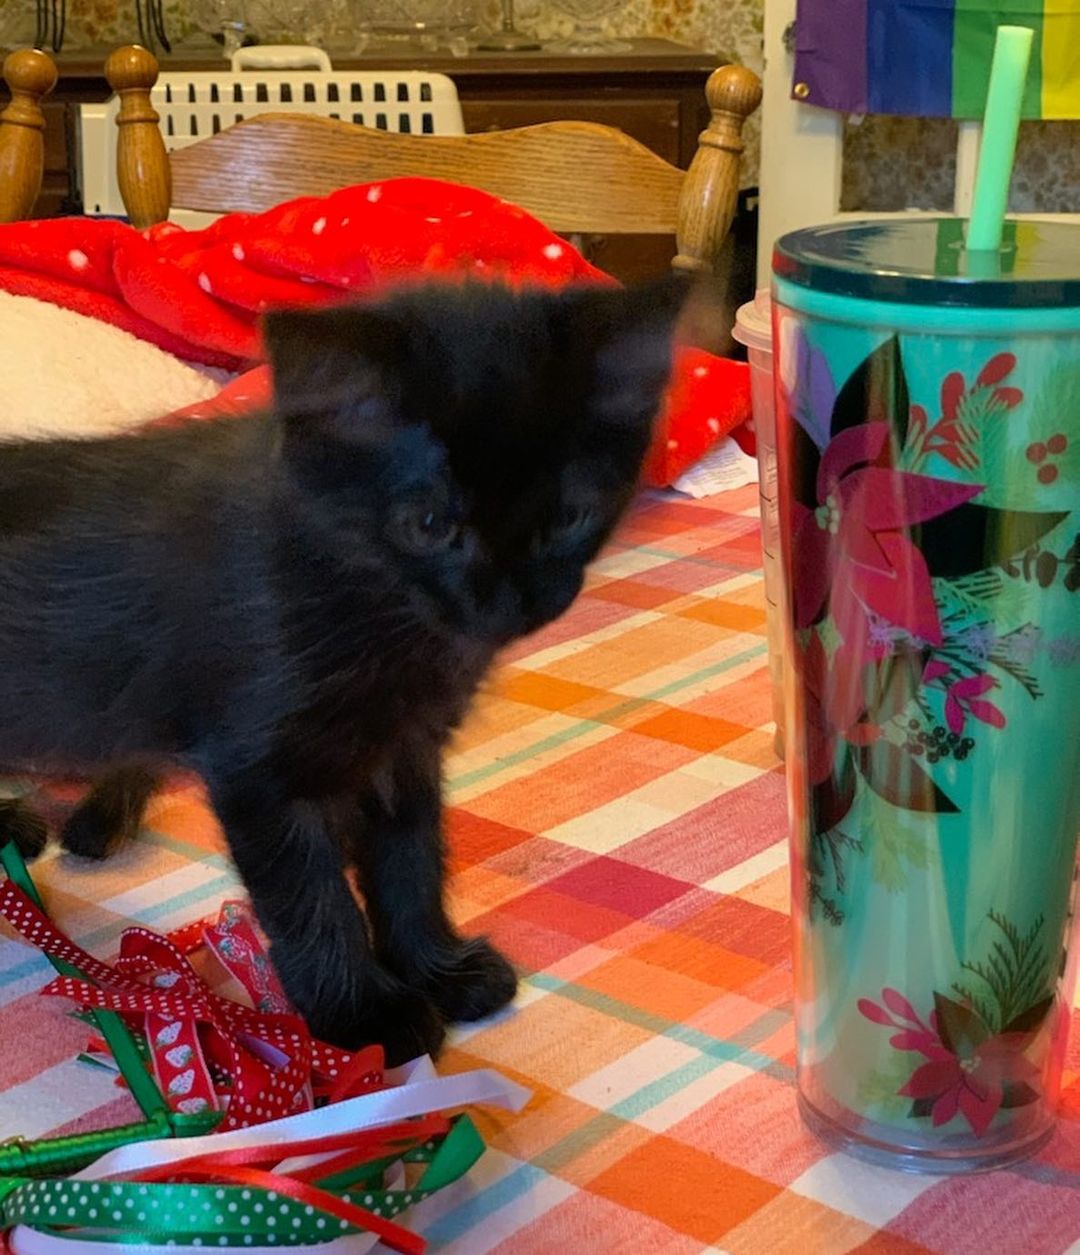 This is Nyx, one of Gypsy Rose’s kittens- she was just adopted!🌺 Her new family sent this message to her foster mom- “Hi! I’m in my new home gettin lots of lovin’. My first 12 hours have been great! I ate, drank, slept, used the litter box and played with the toys you gave me and some my new family bought. Thank you for giving me such a great start!!”
<a target='_blank' href='https://www.instagram.com/explore/tags/adoptdontshop/'>#adoptdontshop</a>
<a target='_blank' href='https://www.instagram.com/explore/tags/fosterssavelives/'>#fosterssavelives</a> 
<a target='_blank' href='https://www.instagram.com/explore/tags/blackkittensaregoodluck/'>#blackkittensaregoodluck</a> 
<a target='_blank' href='https://www.instagram.com/explore/tags/blackkittensrule/'>#blackkittensrule</a>